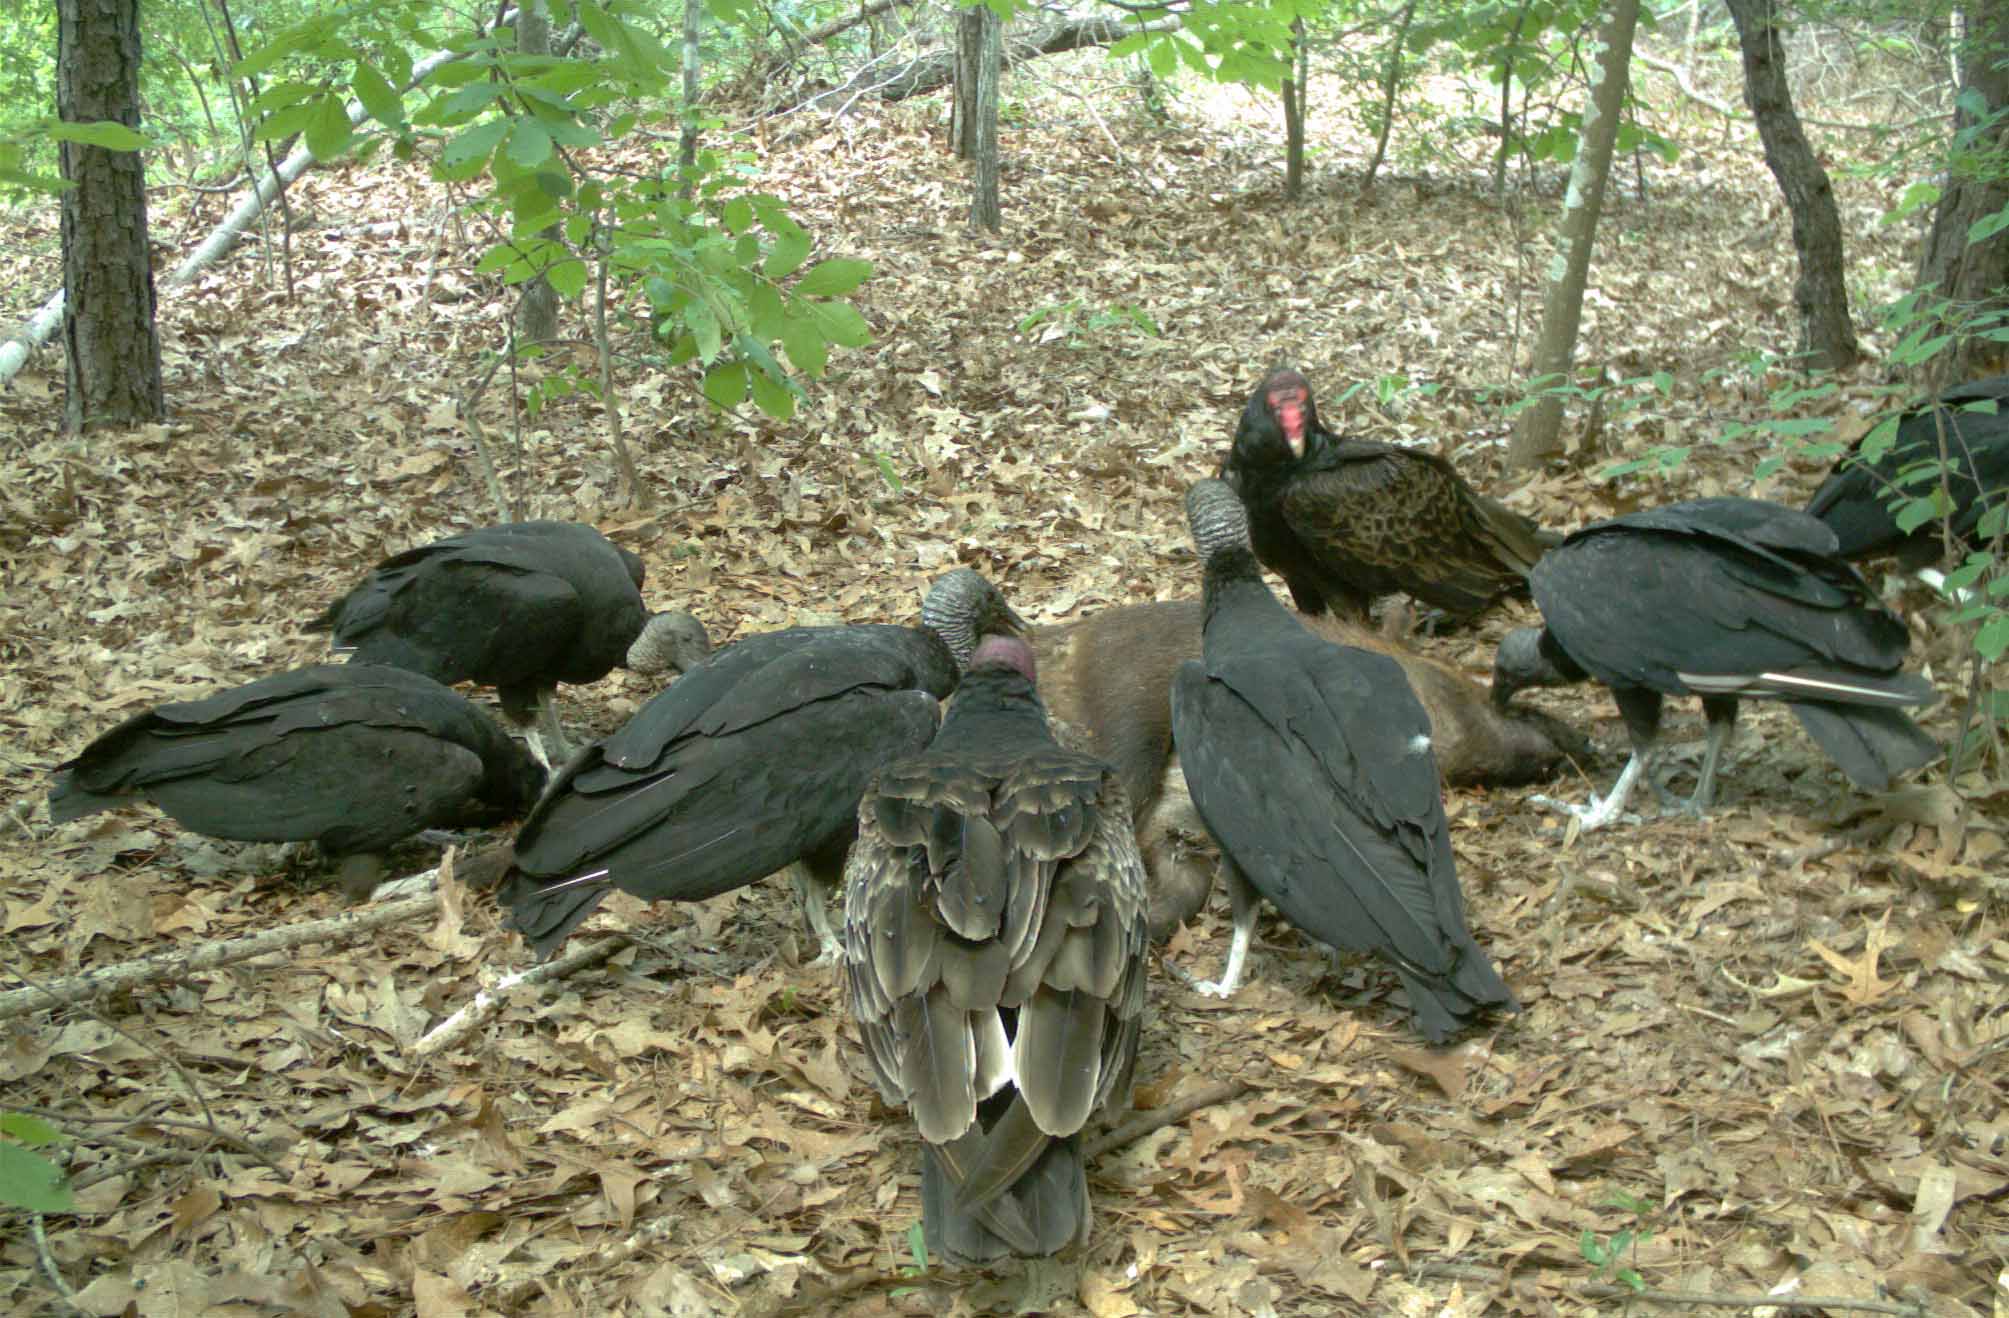 The natural world: Turkey vultures